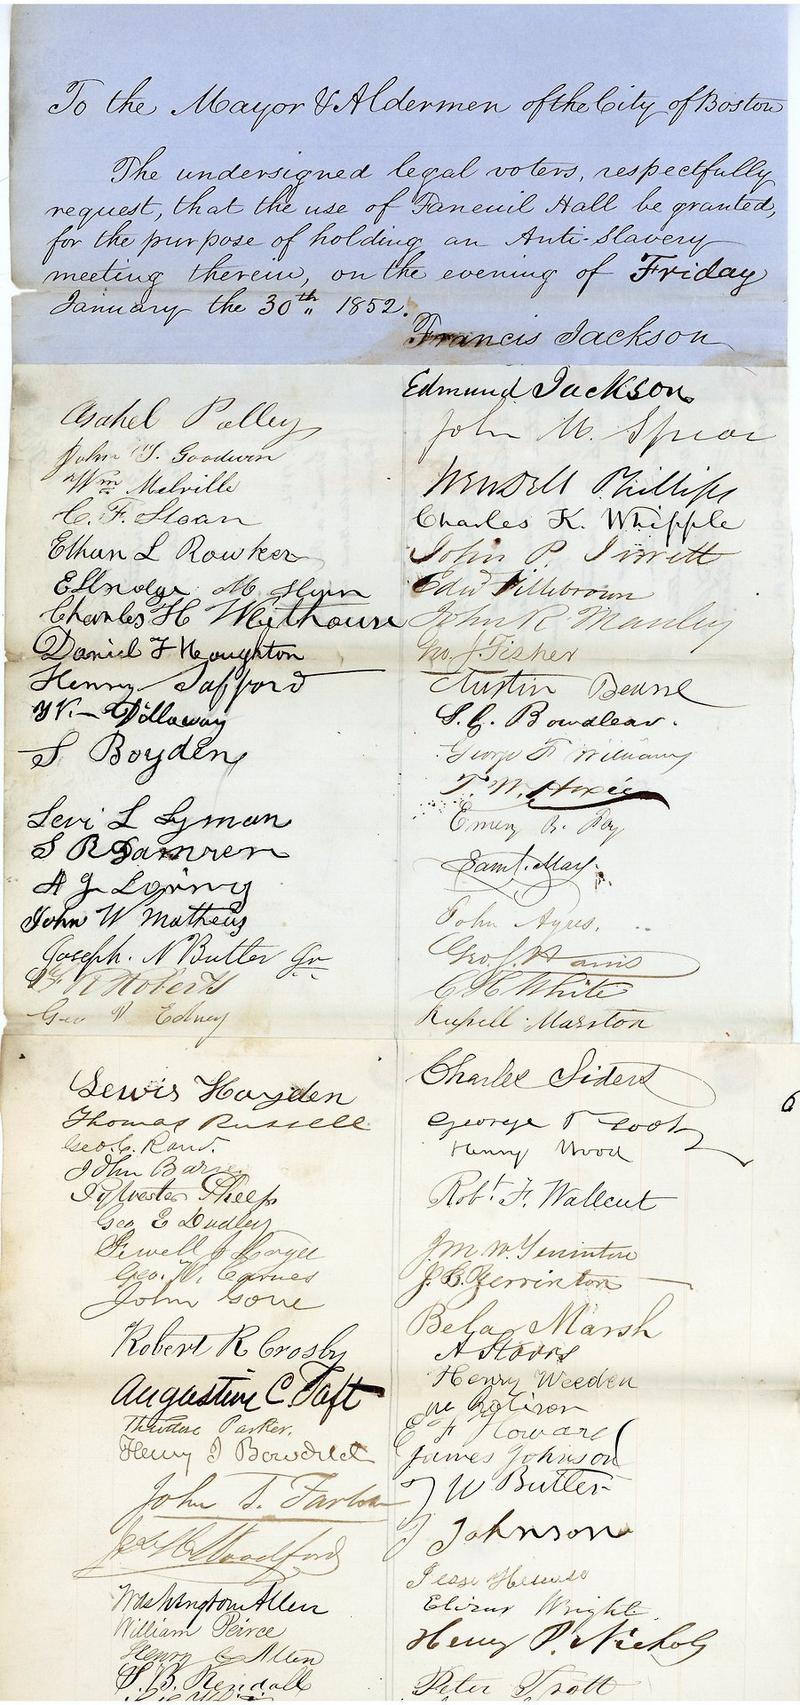 Anti-Slavery meeting petition, Docket 1852-0112-A,  Proceedings of the City Council, 1852, Collection 0100.001, Boston City Archives 